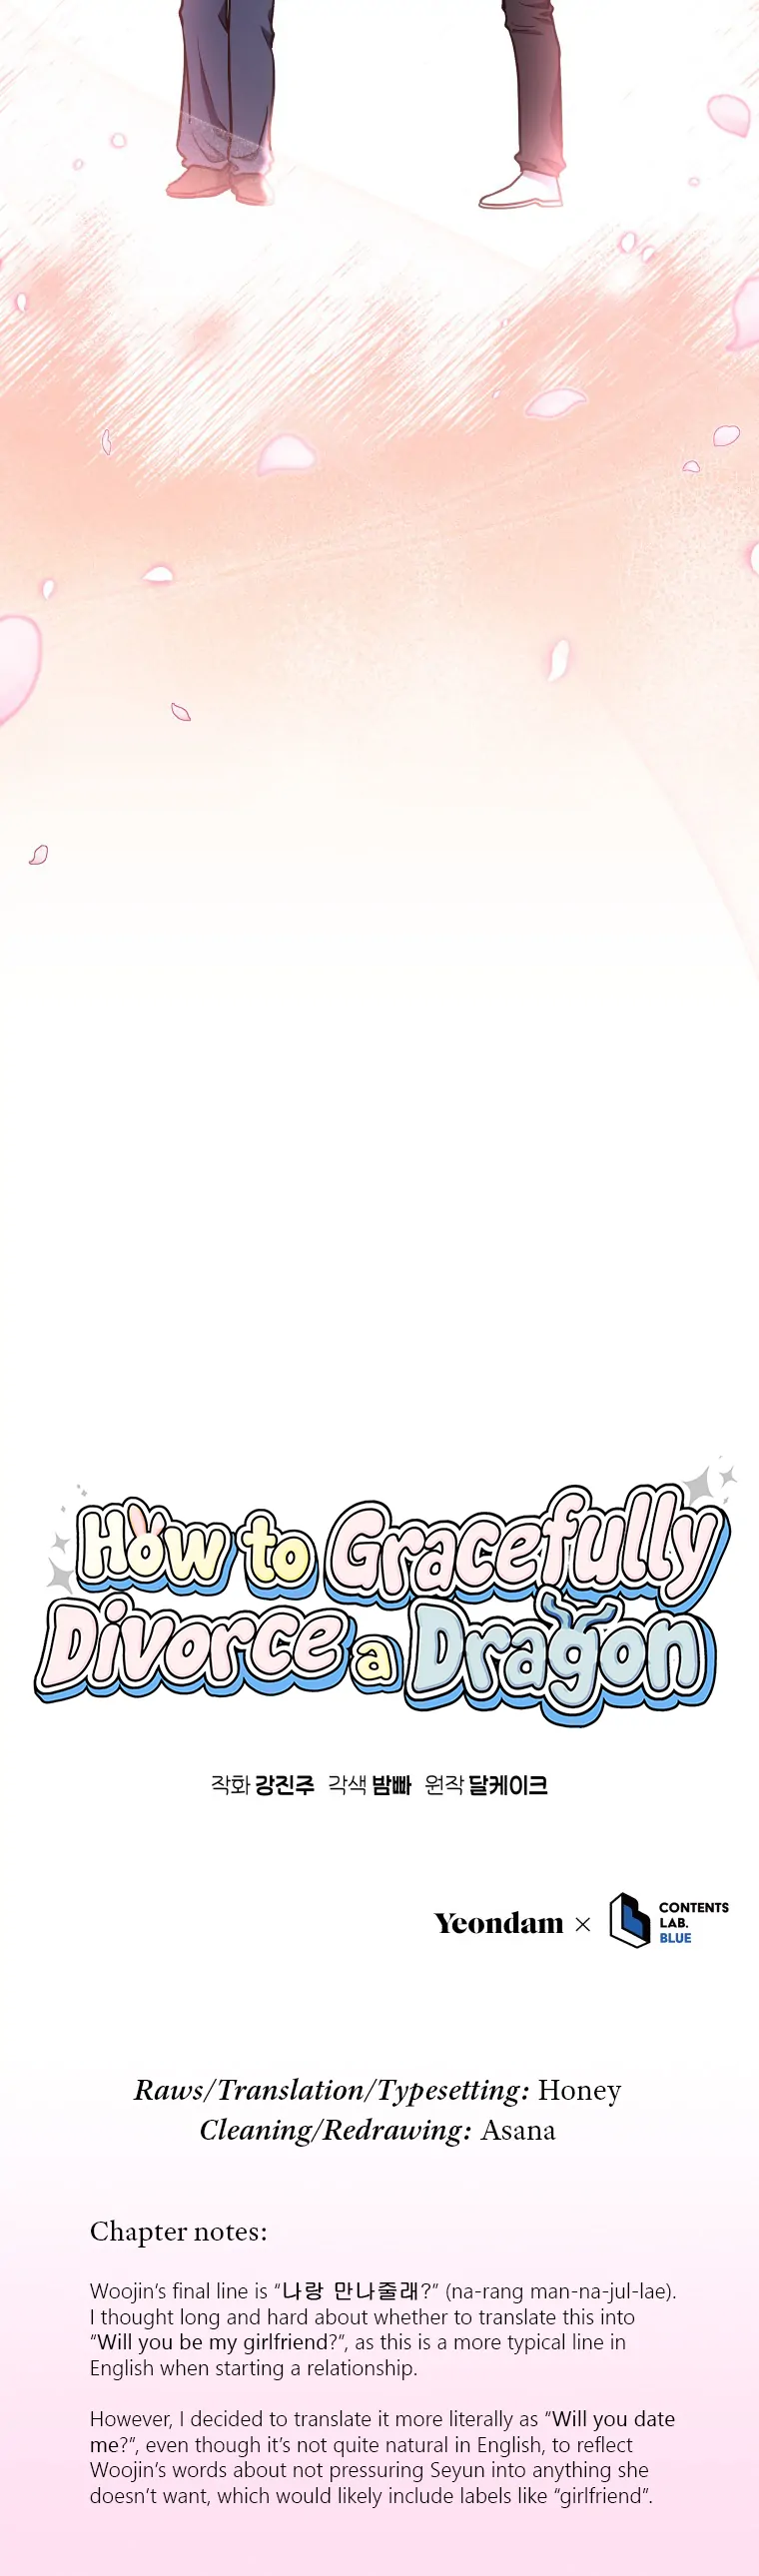 How to Gracefully Divorce a Dragon chapter 28